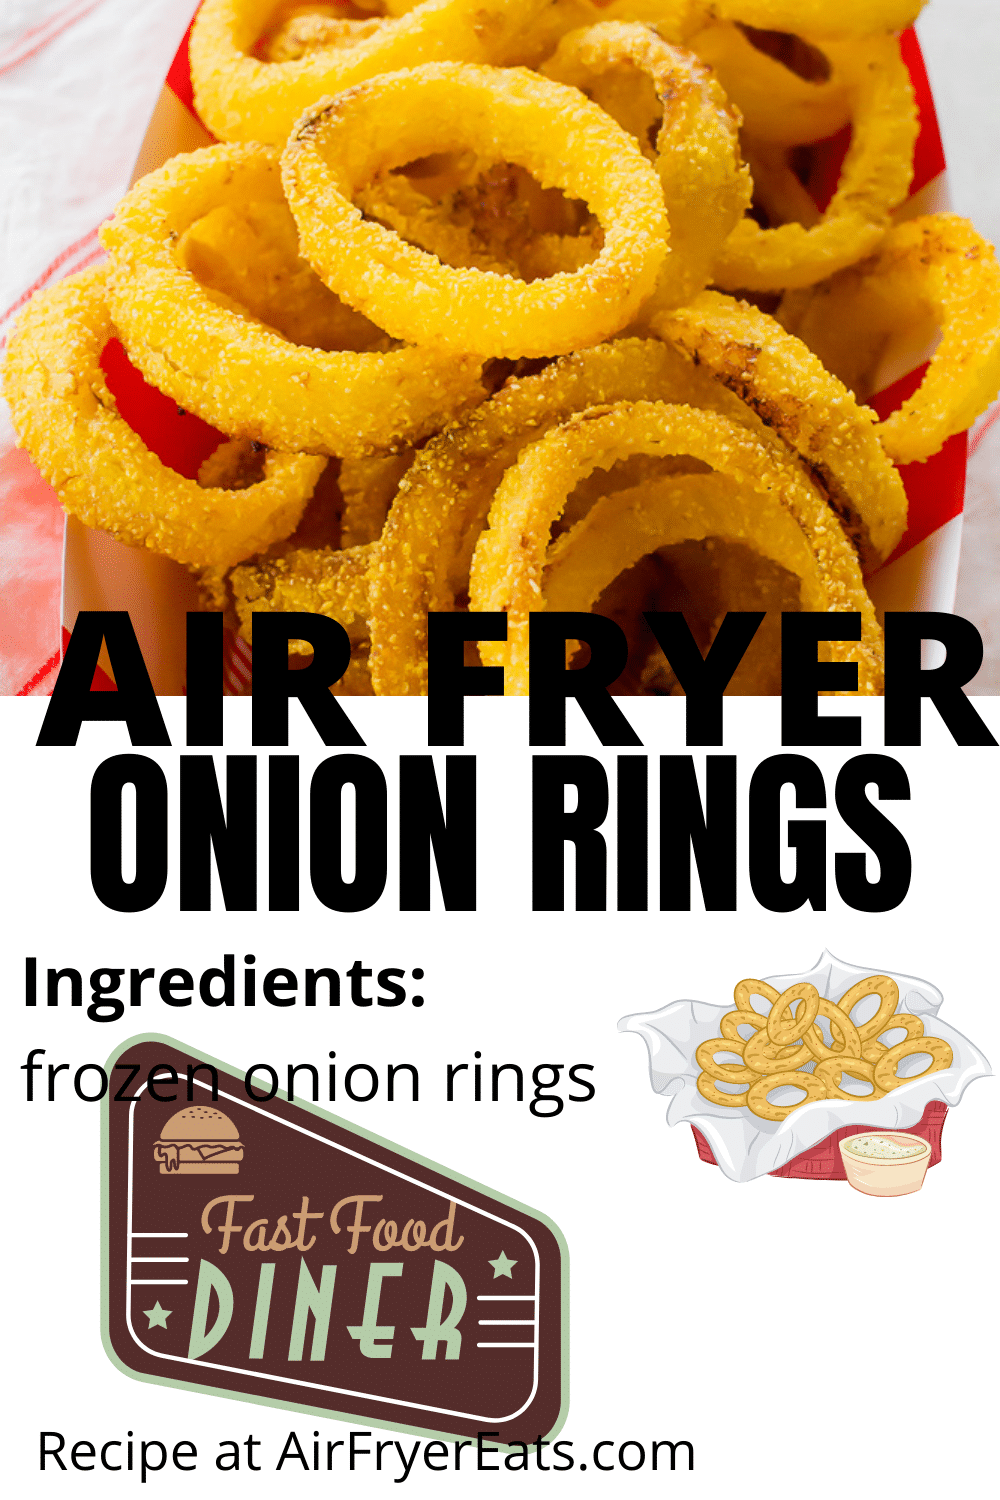 Skip the drive-thru with these quick and crispy Frozen Air Fryer Onion Rings! Get a great crunch without the oil and added fat. #airfryer #onionrings #foodfast via @vegetarianmamma